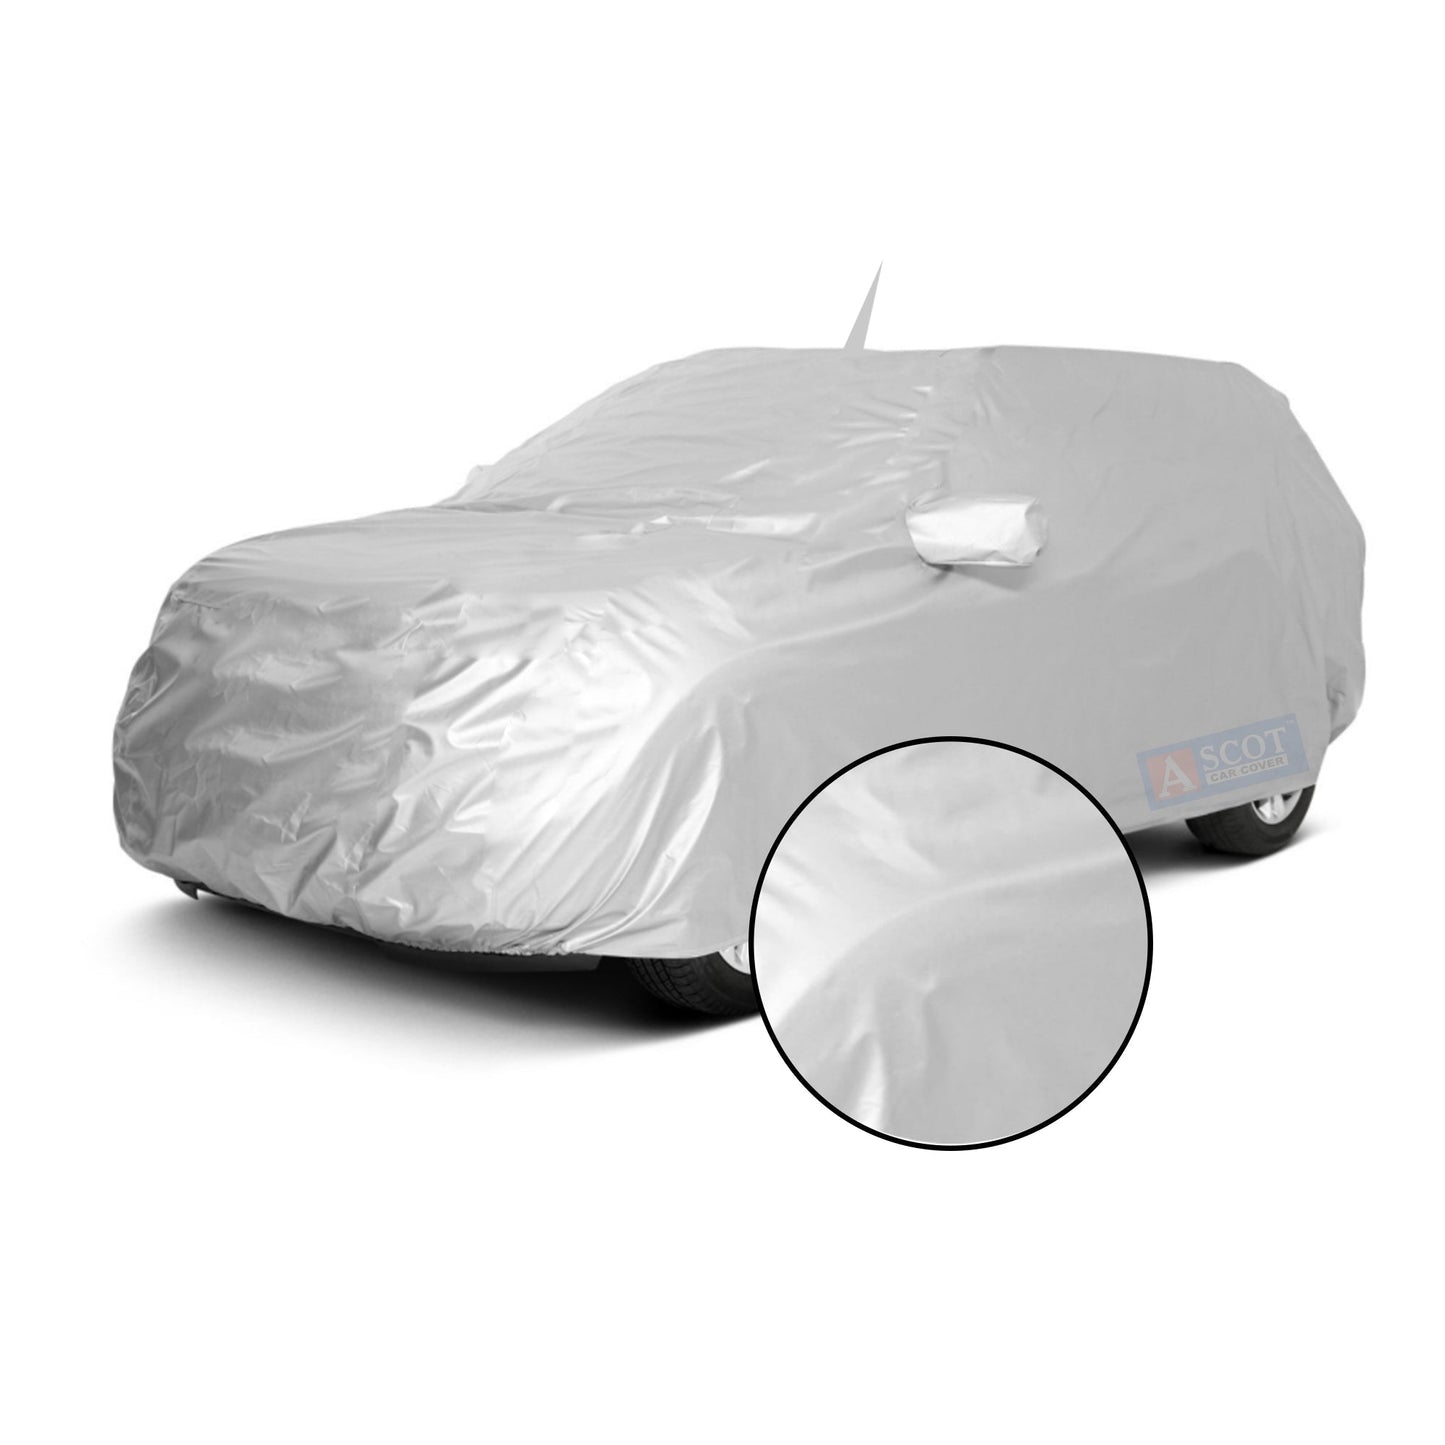 Ascot Toyota Innova 2005-2016 Model Car Body Cover Dust Proof, Trippel Stitched